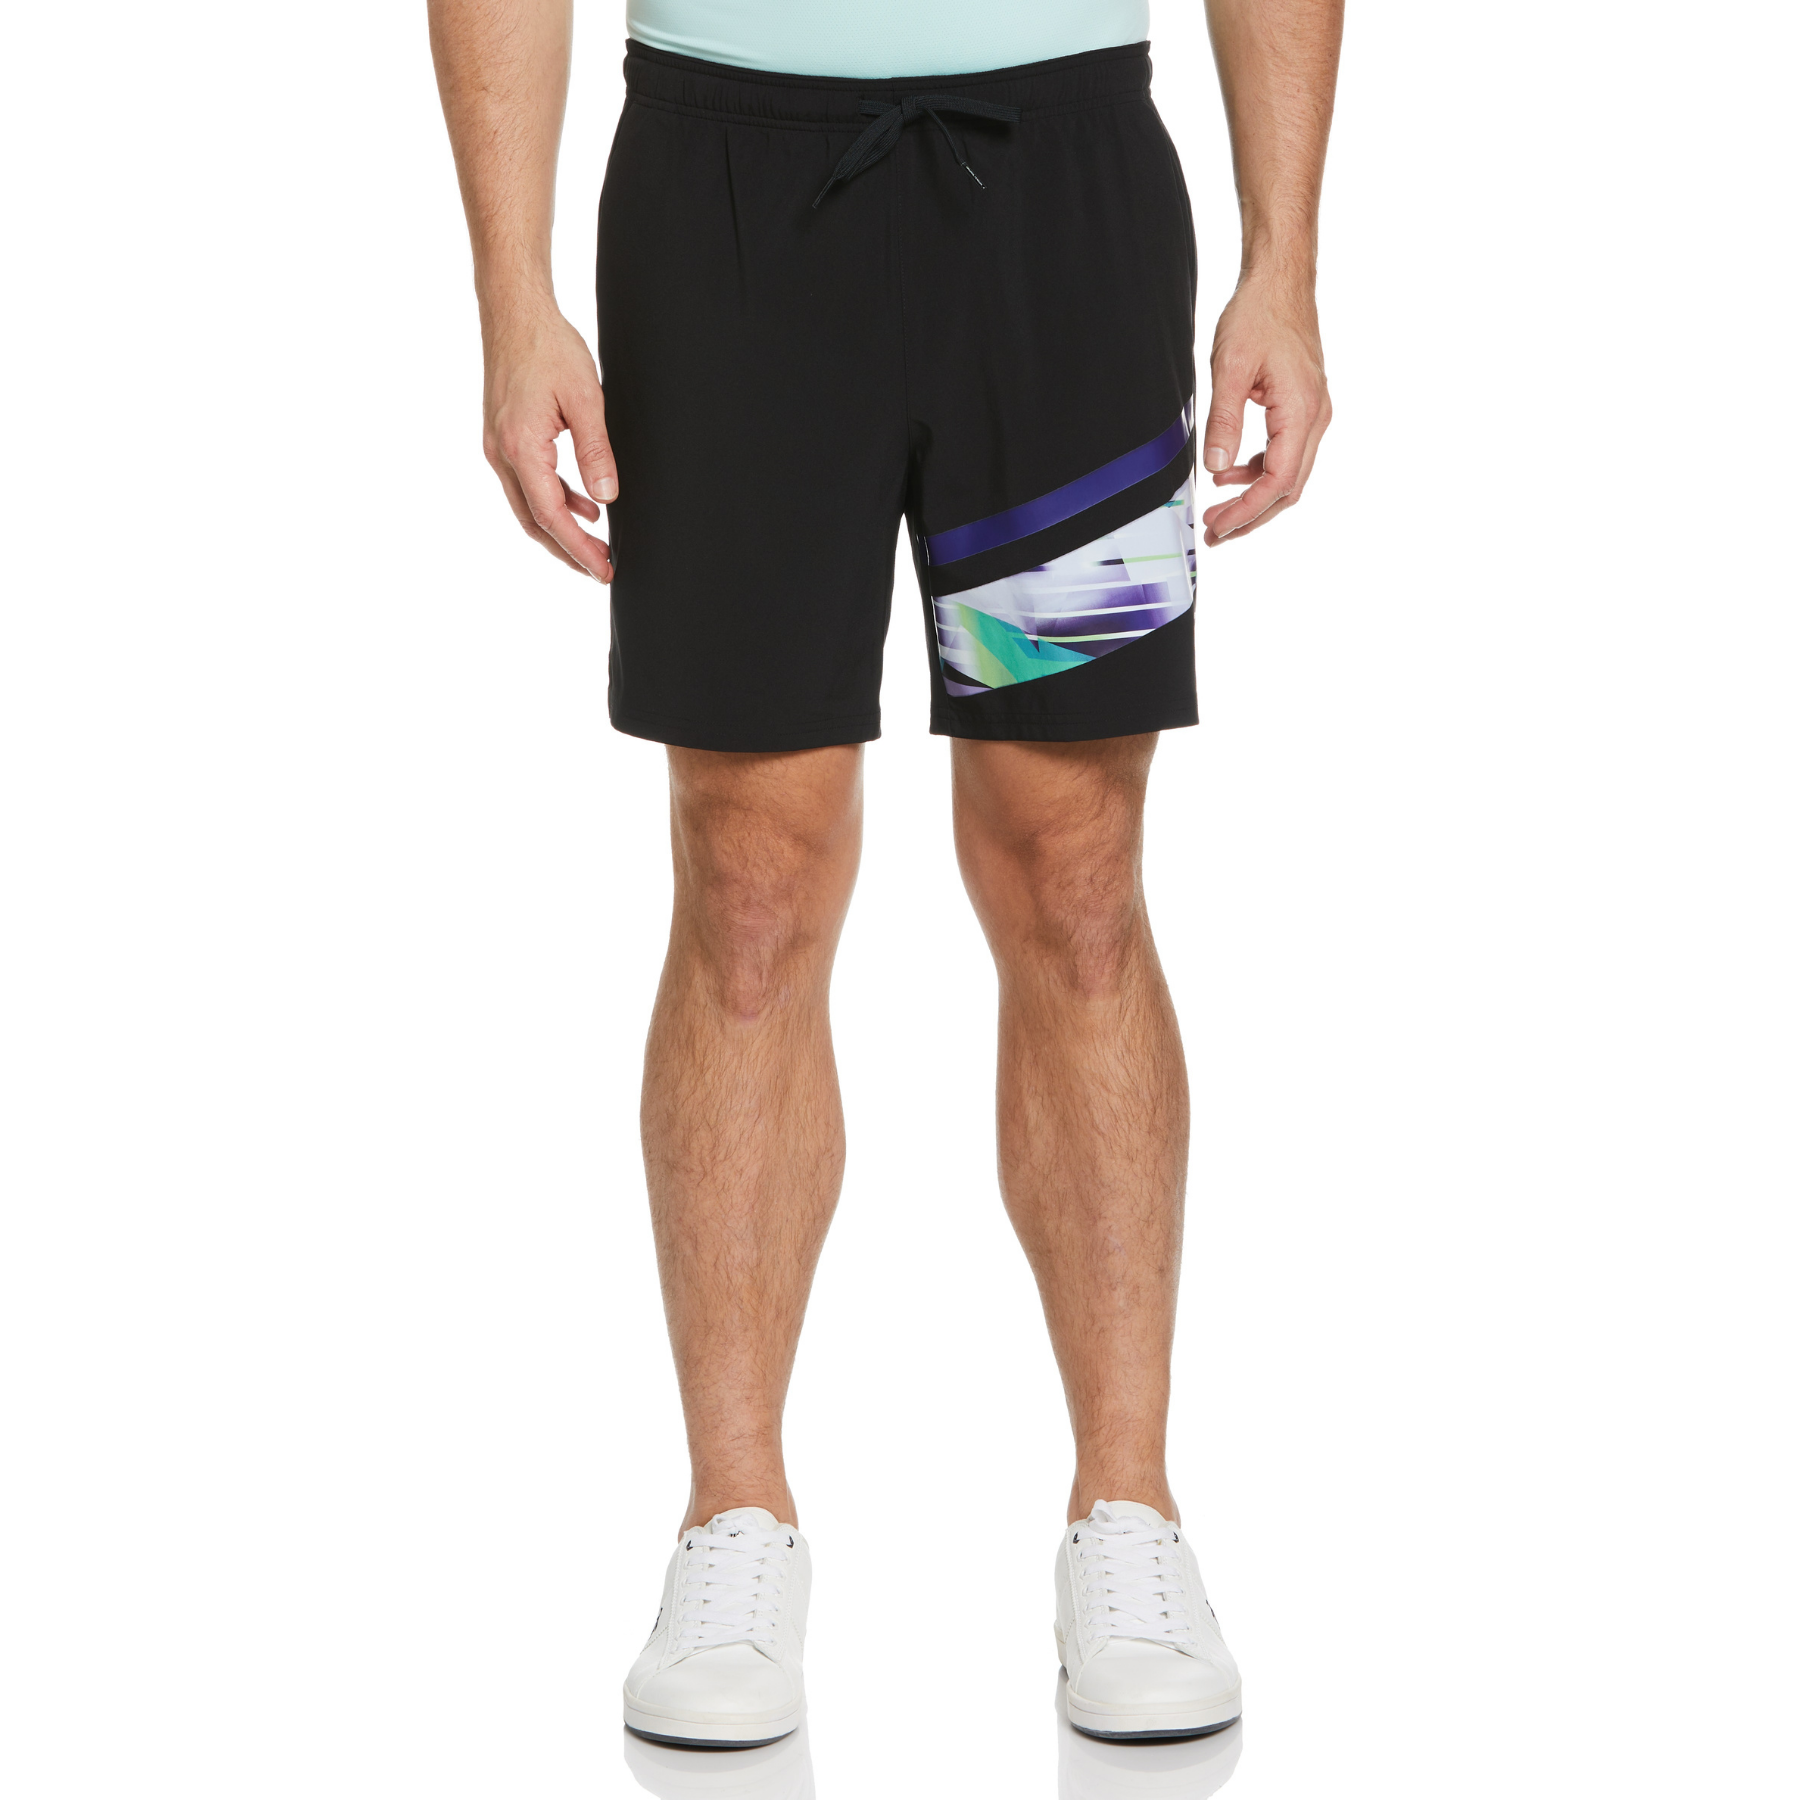 View Performance Printed Tennis Shorts In Caviar information